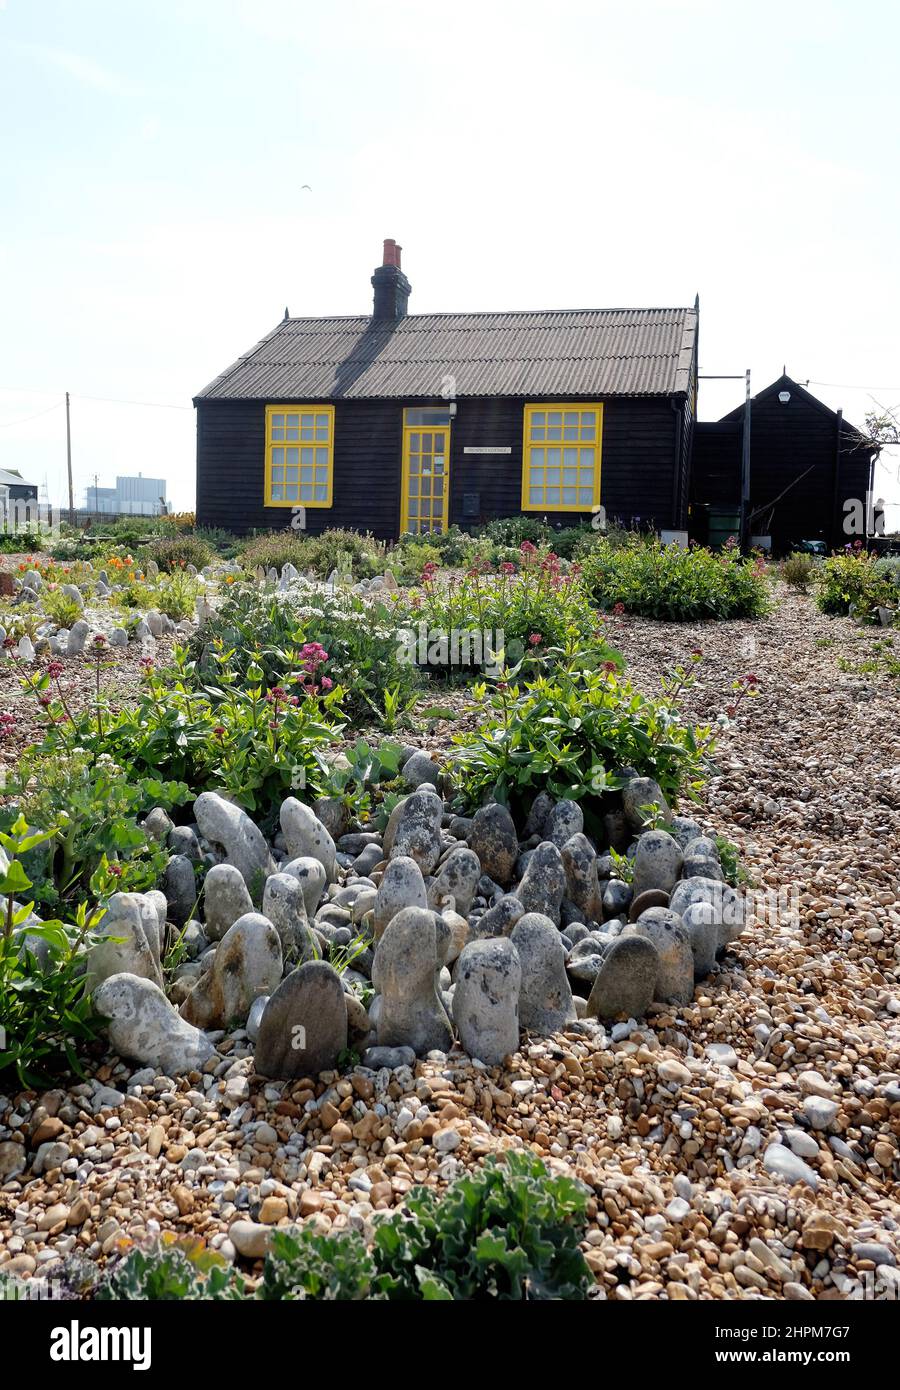 Prospect Cottage on the coast in Dungeness, Kent, UK. Originally a Victorian fisherman's hut,the house was purchased by director and artist Derek Jarman in 1987, and was his home until his death in 1994. Stock Photo